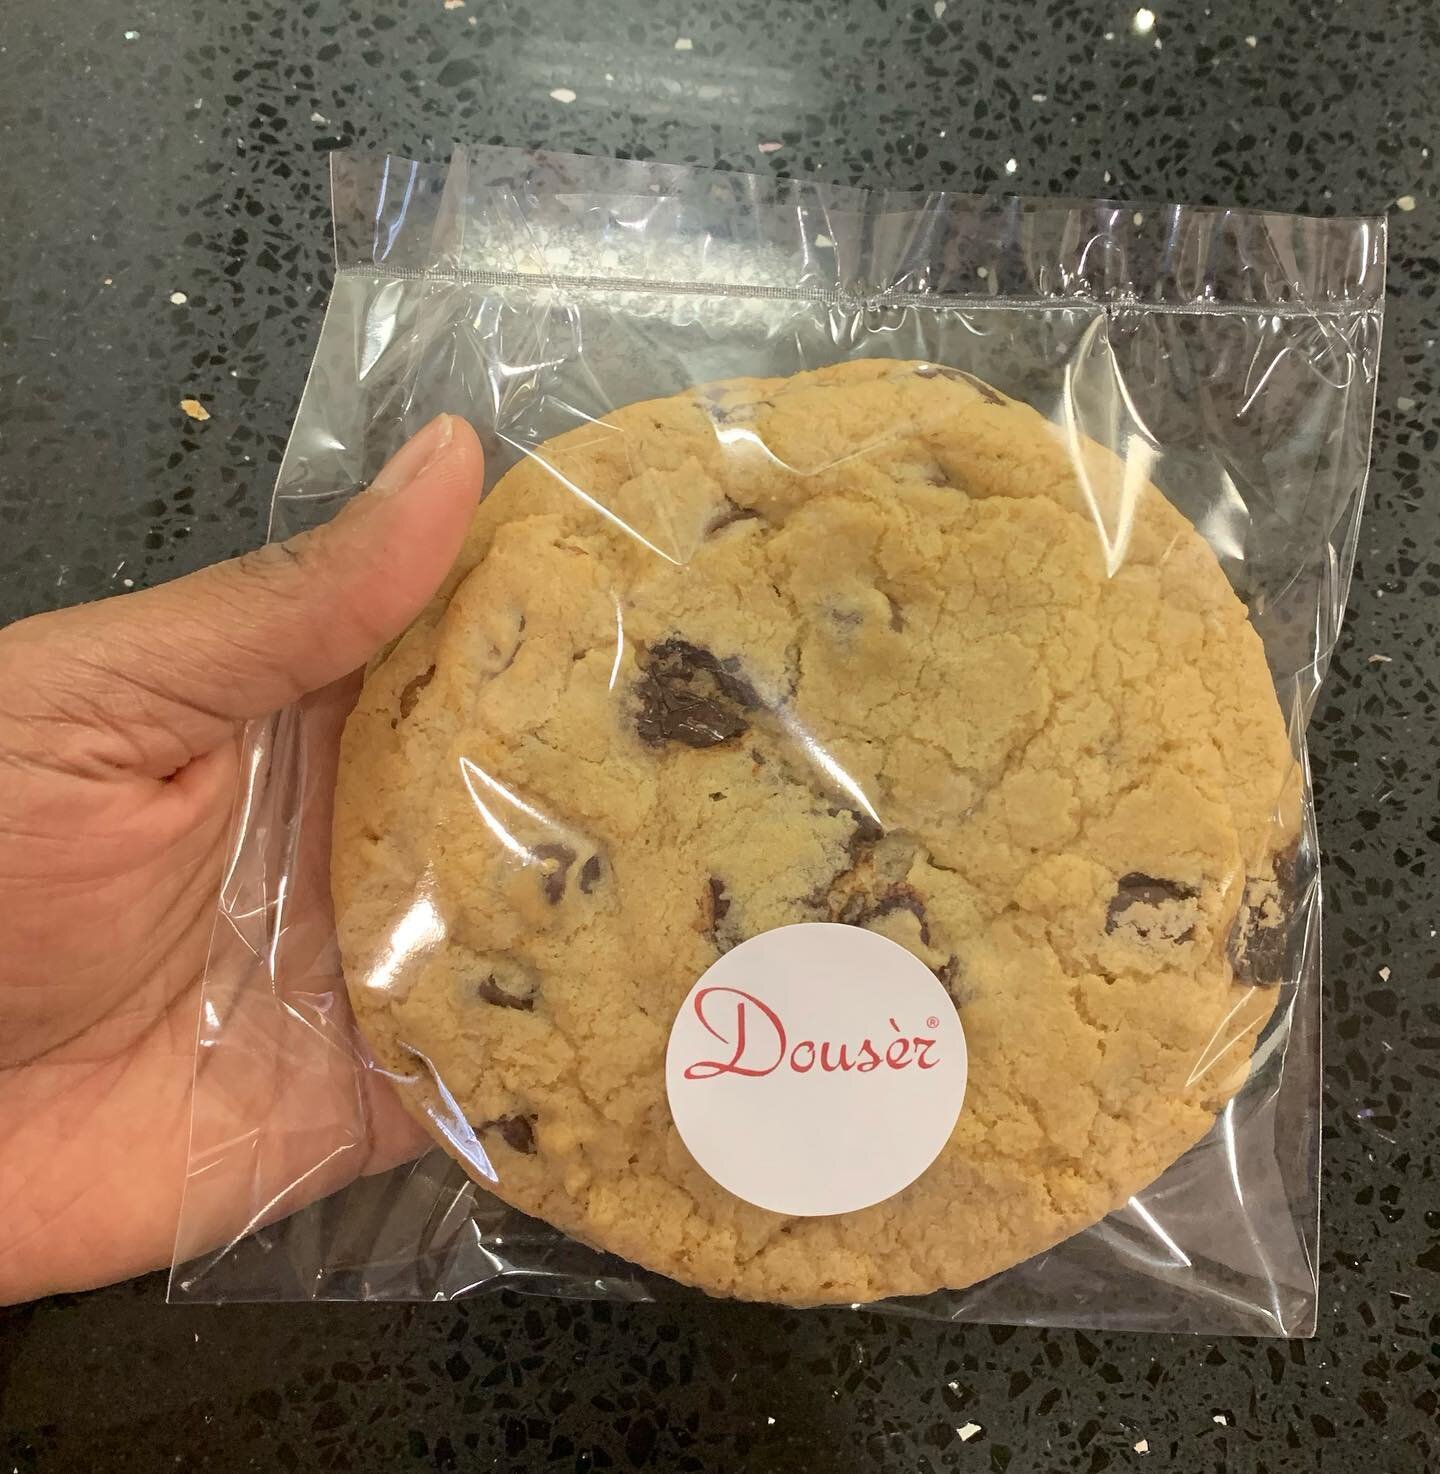 Trying out new packaging/labeling and sizing options for these gigantic cookies in my product lineup. 
Because who doesn&rsquo;t love a gigantic homemade cookie with a cup of coffee??
#cookies #chocolatechipcookies #chocolatechip #chocolatechips #hom